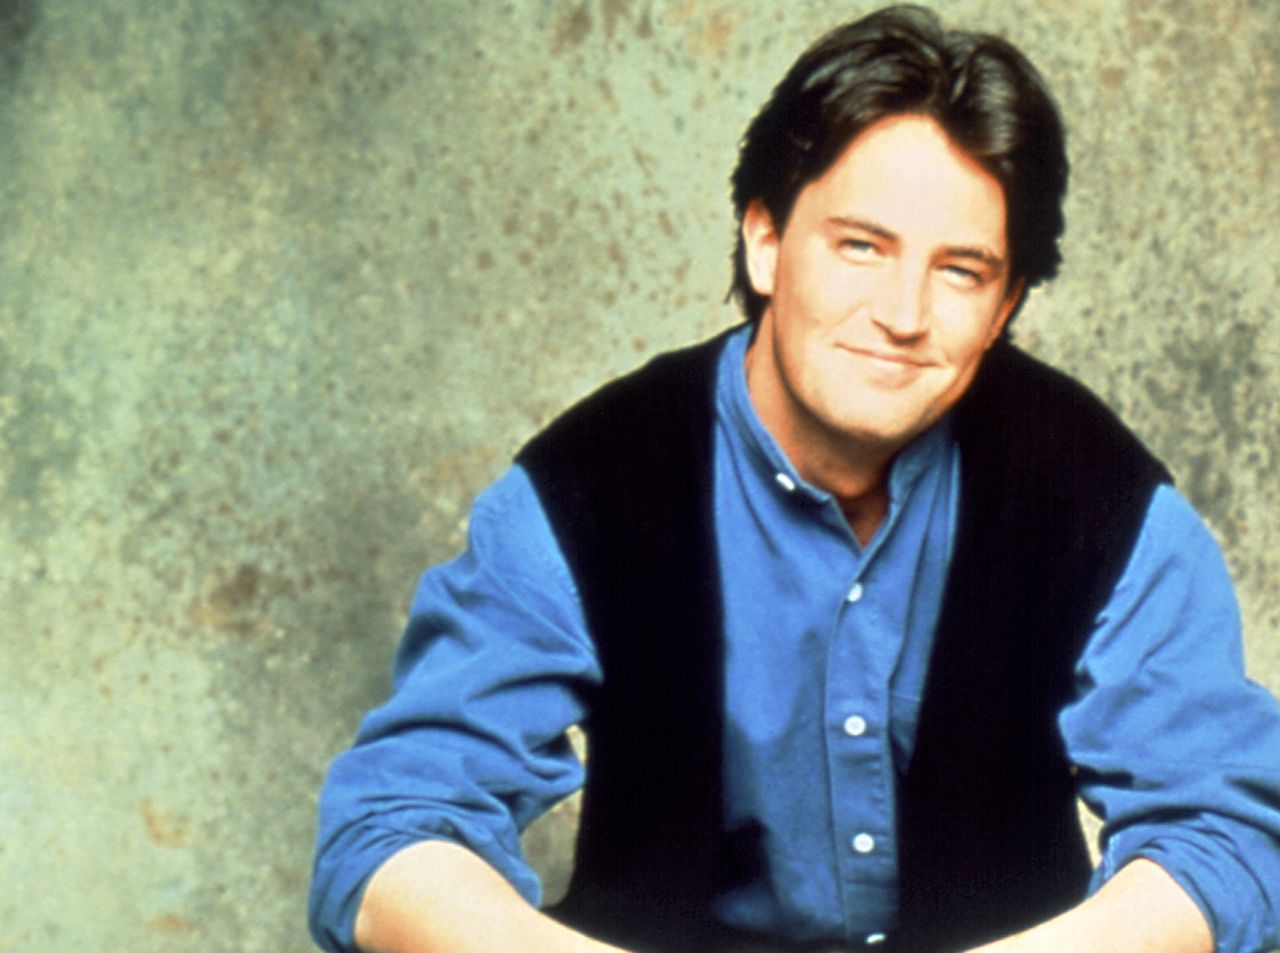 Ketamine and testosterone: New details emerge in Matthew Perry's autopsy